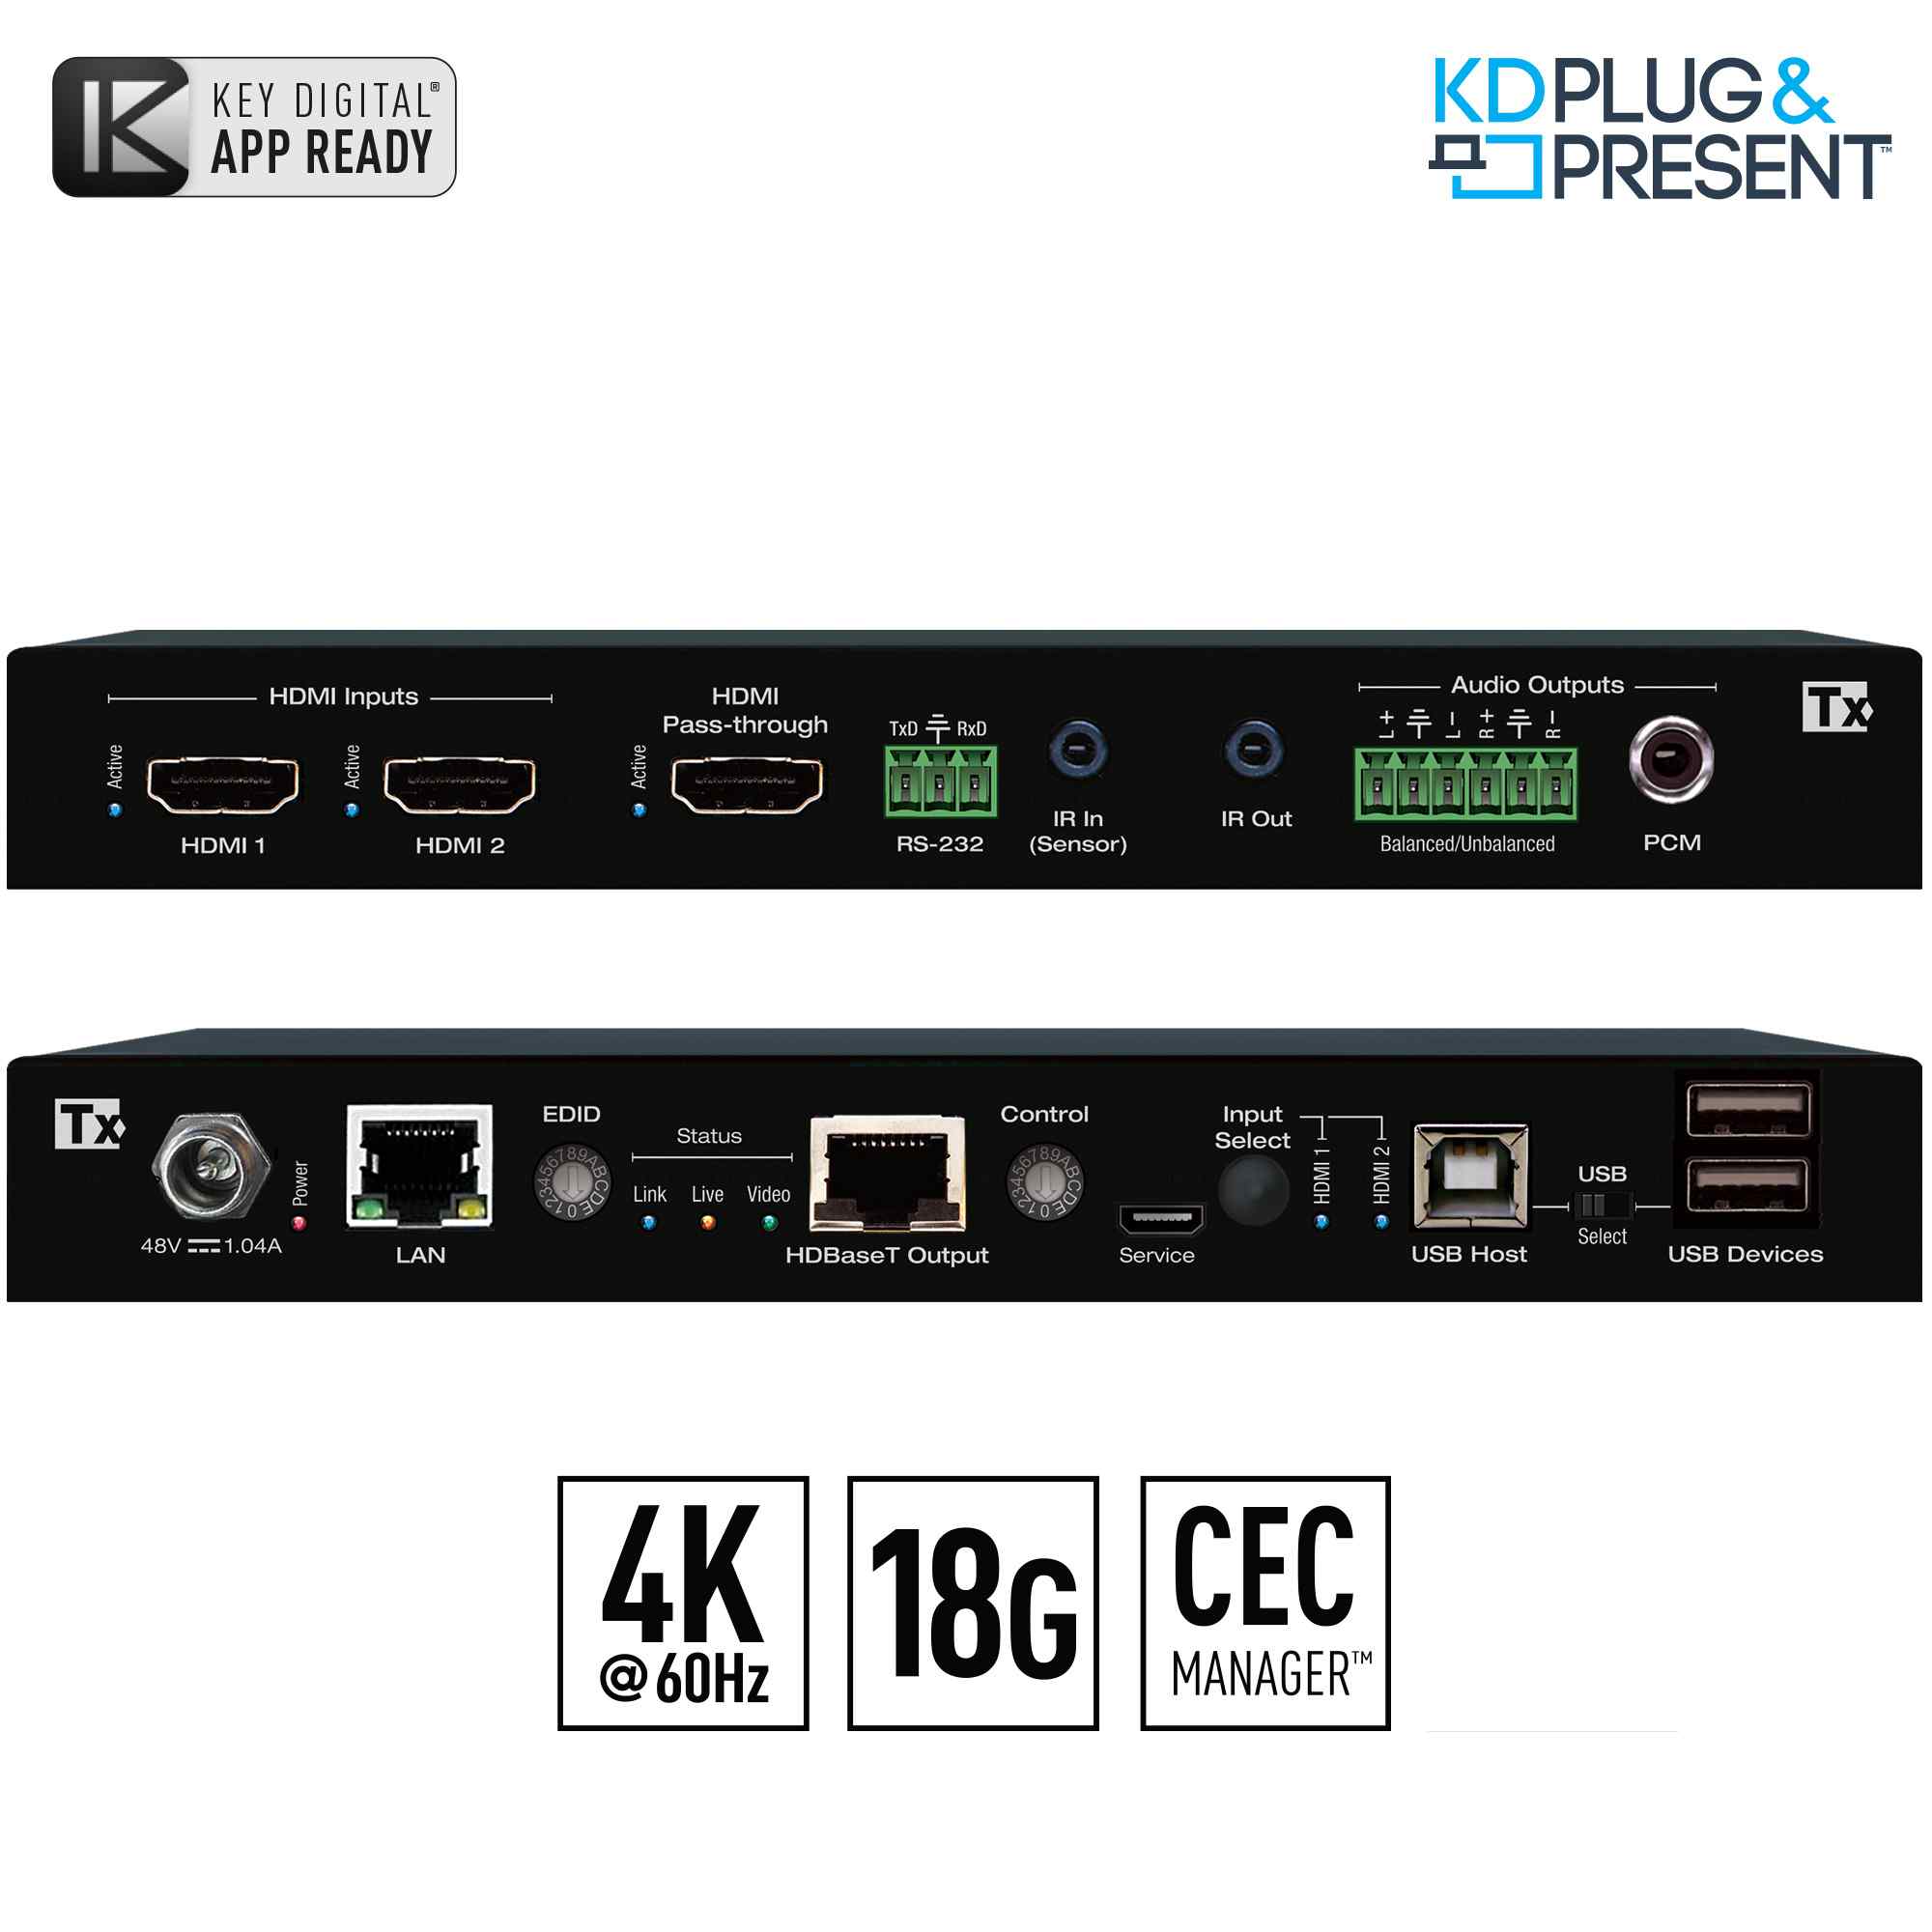 Key Digital HDMI Switcher front and rear view